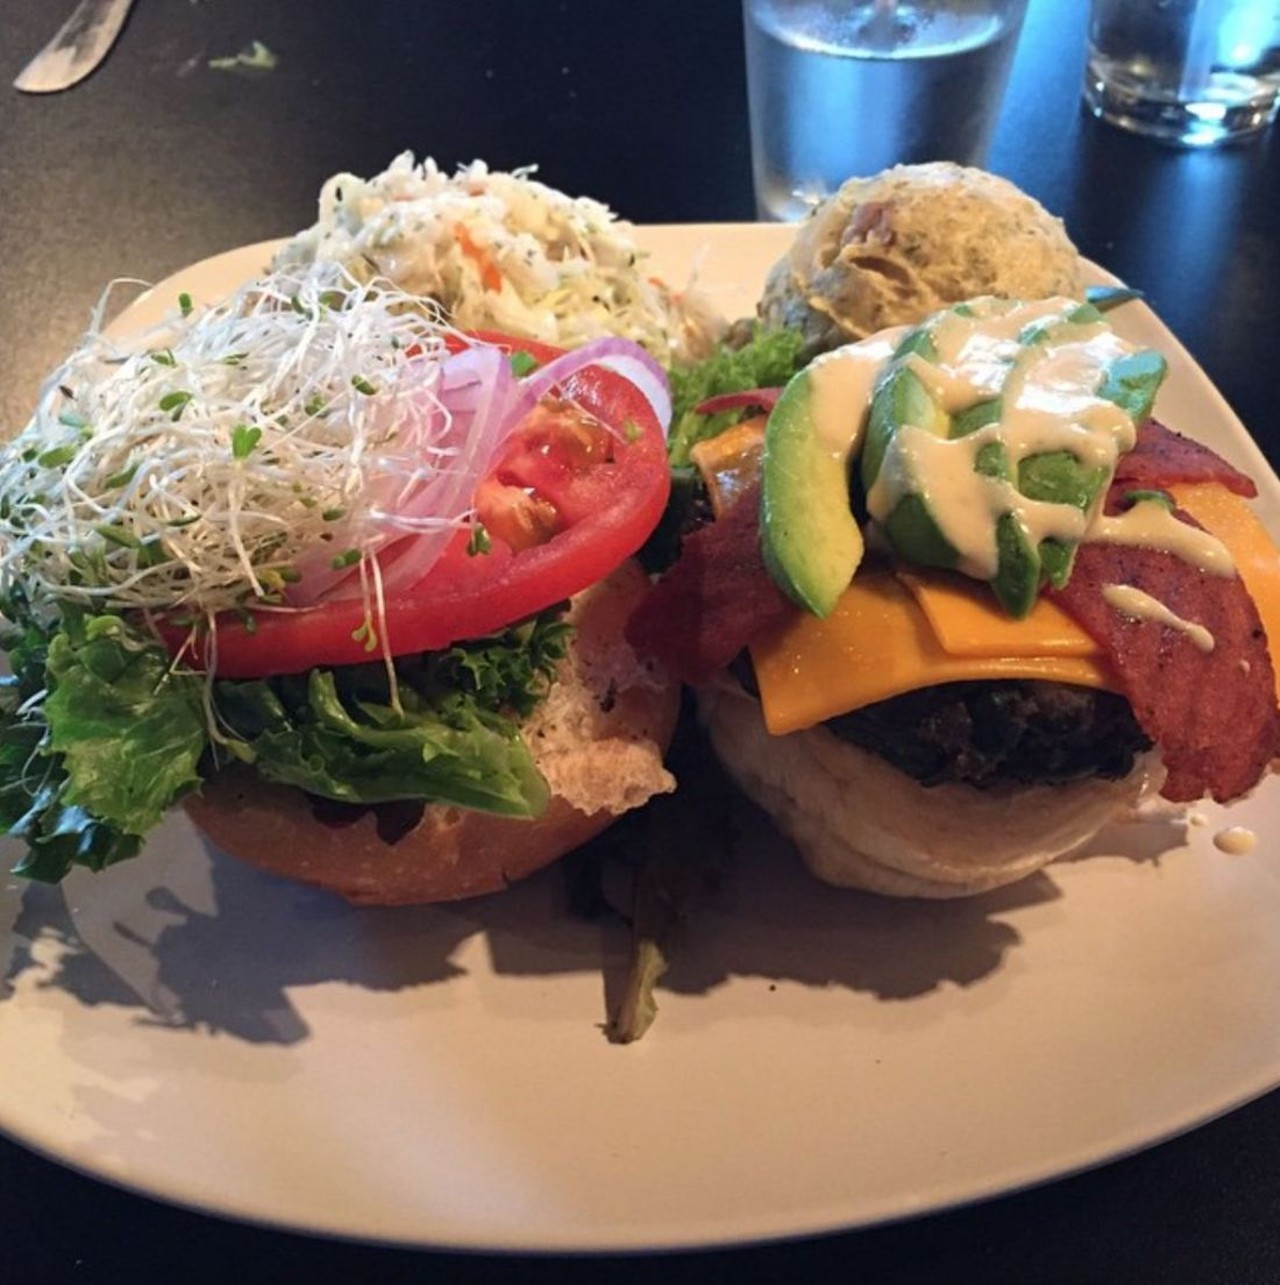 Earth Bistro Cafe
216-201-9338, 11122 Clifton Blvd.
Earth Bistro is a great spot for anyone seeking traditional vegan or vegetarian dishes. They take typical meat dishes (like a burger), and turn them into a vegetarian masterpiece. 
Photo via peterxvazquez/Instagram